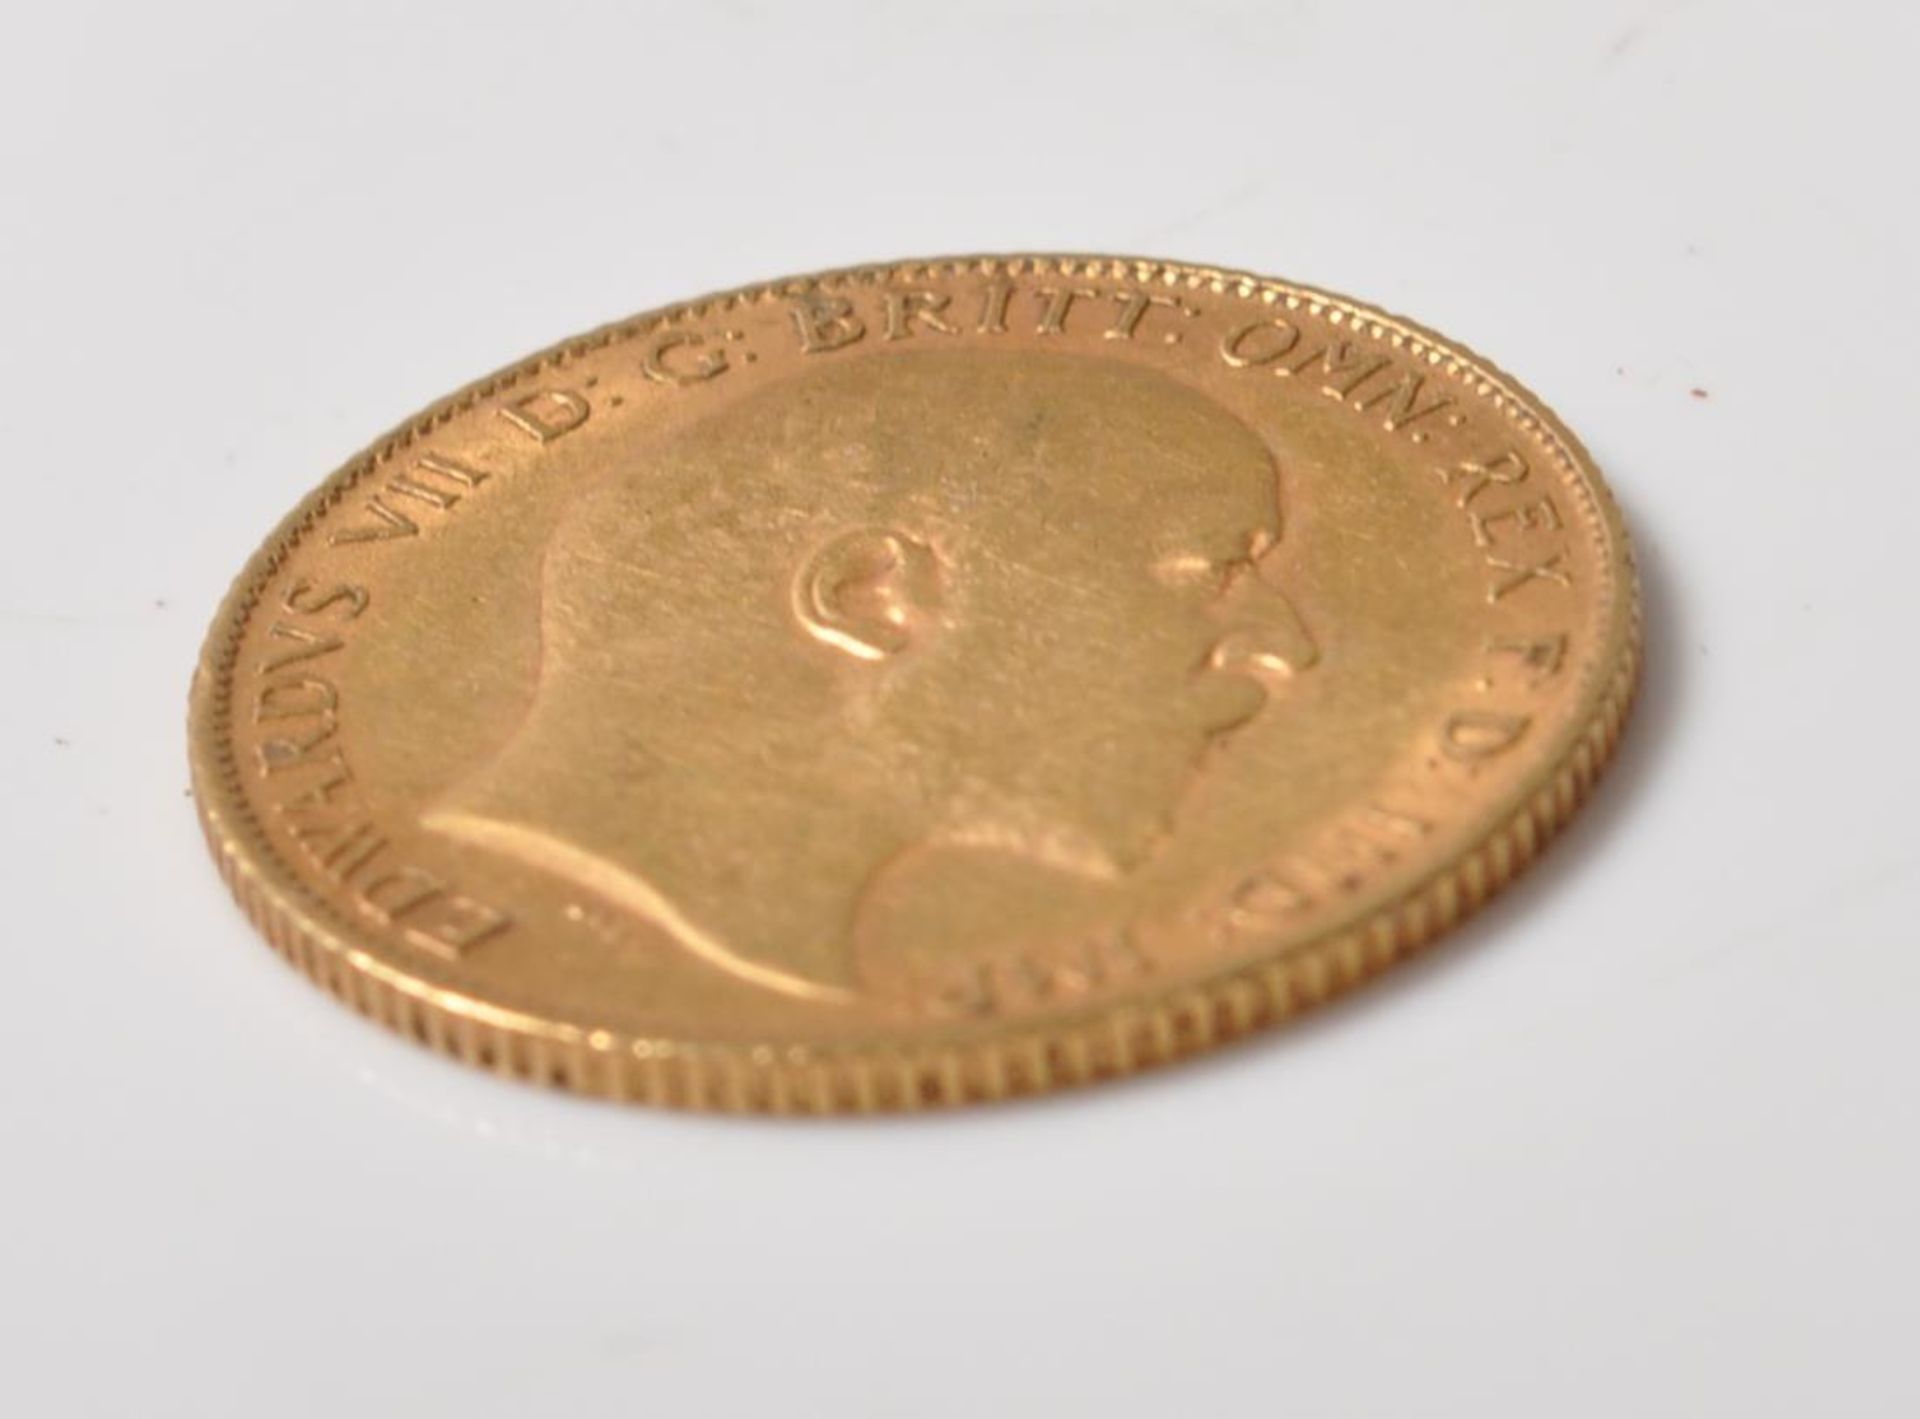 EDWARDIAN 1907 GOLD HALF SOVEREIGN COIN - Image 2 of 4